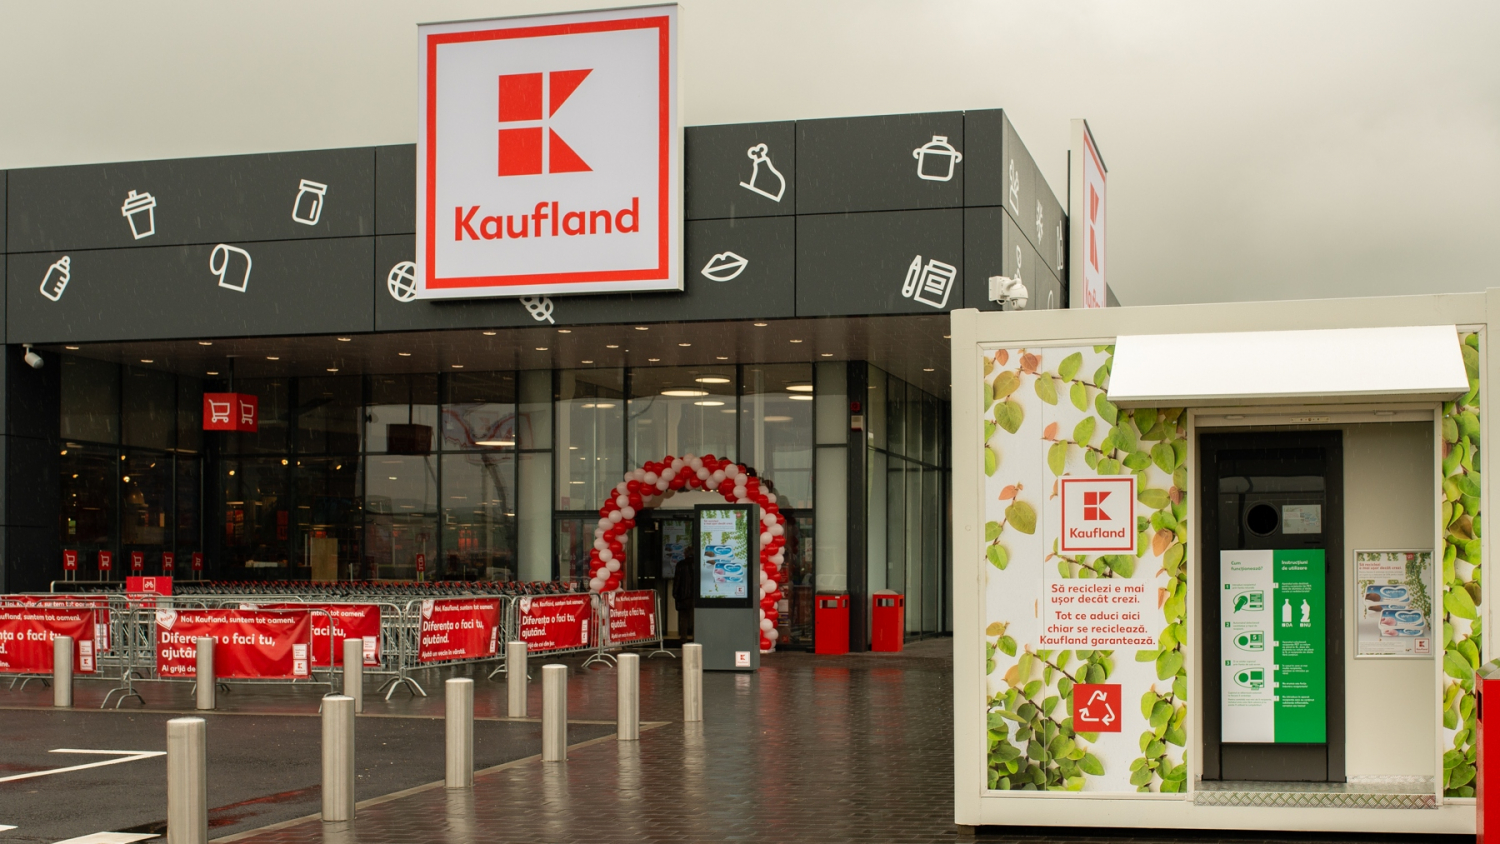 legation shutter Pence Kaufland Romania investments to reach €375 million in 2021 | Property Forum  | News